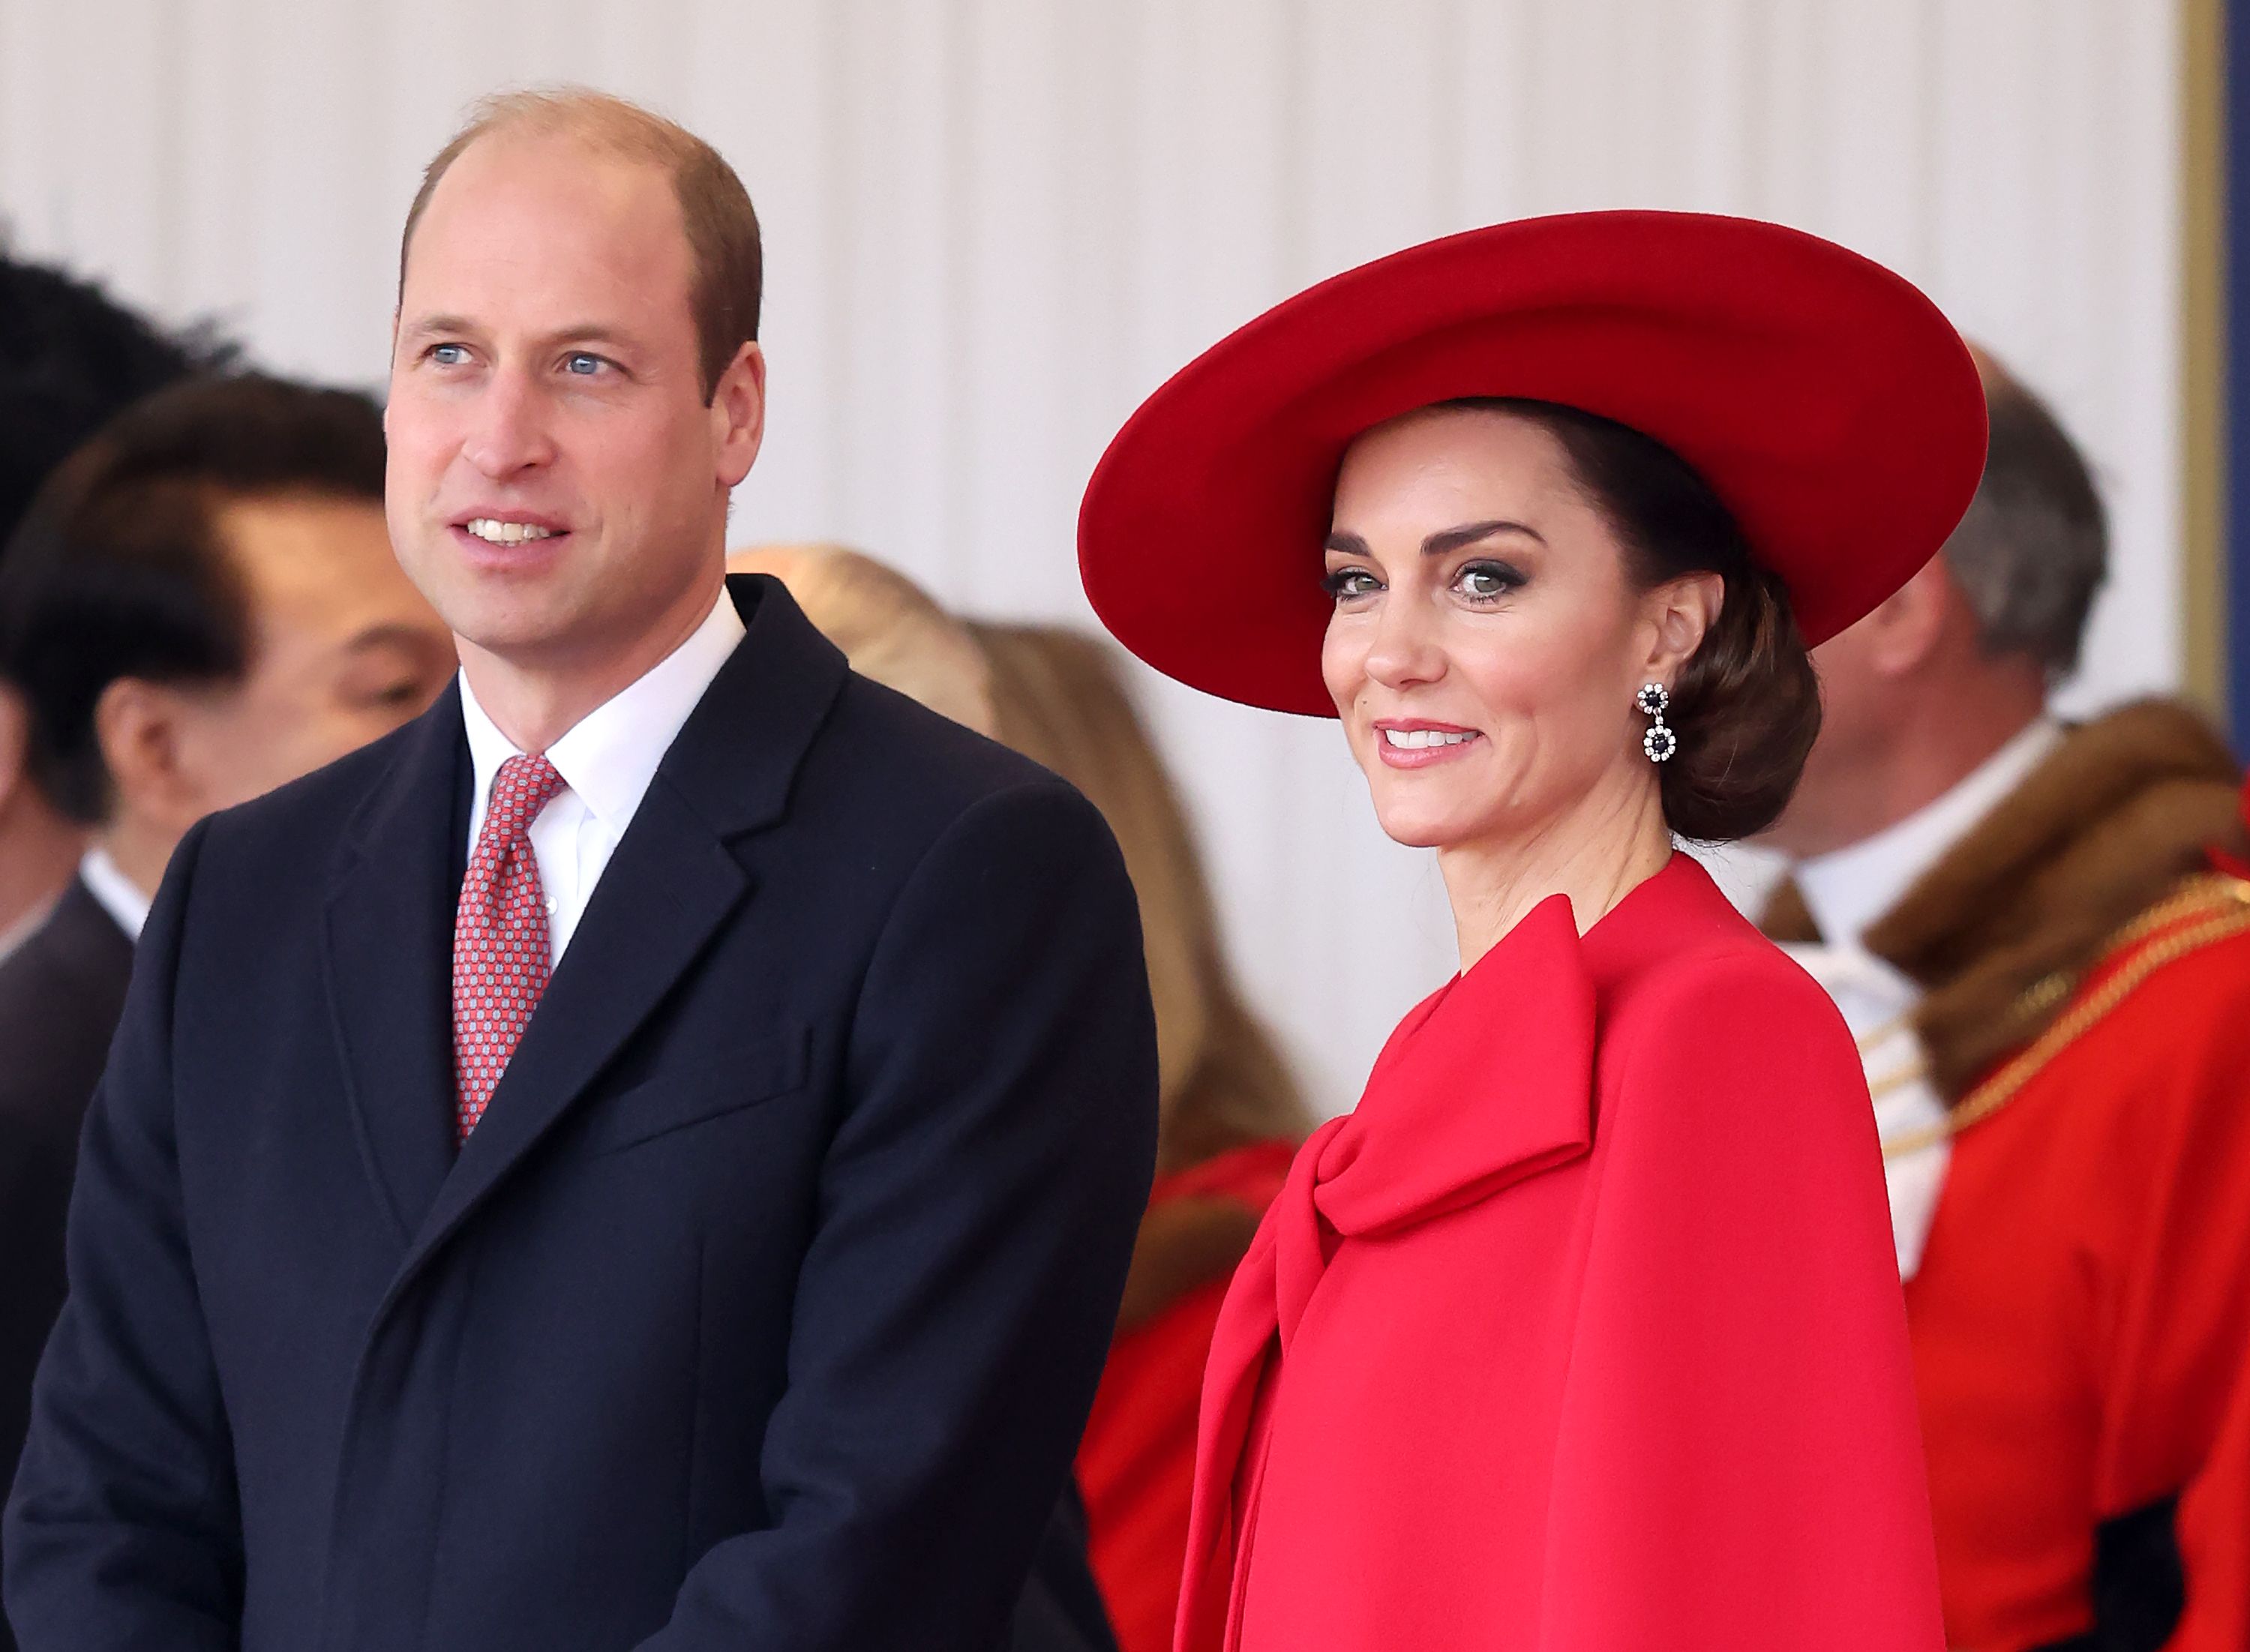 Prince William Will Start Working from Home Amid Royal Crisis